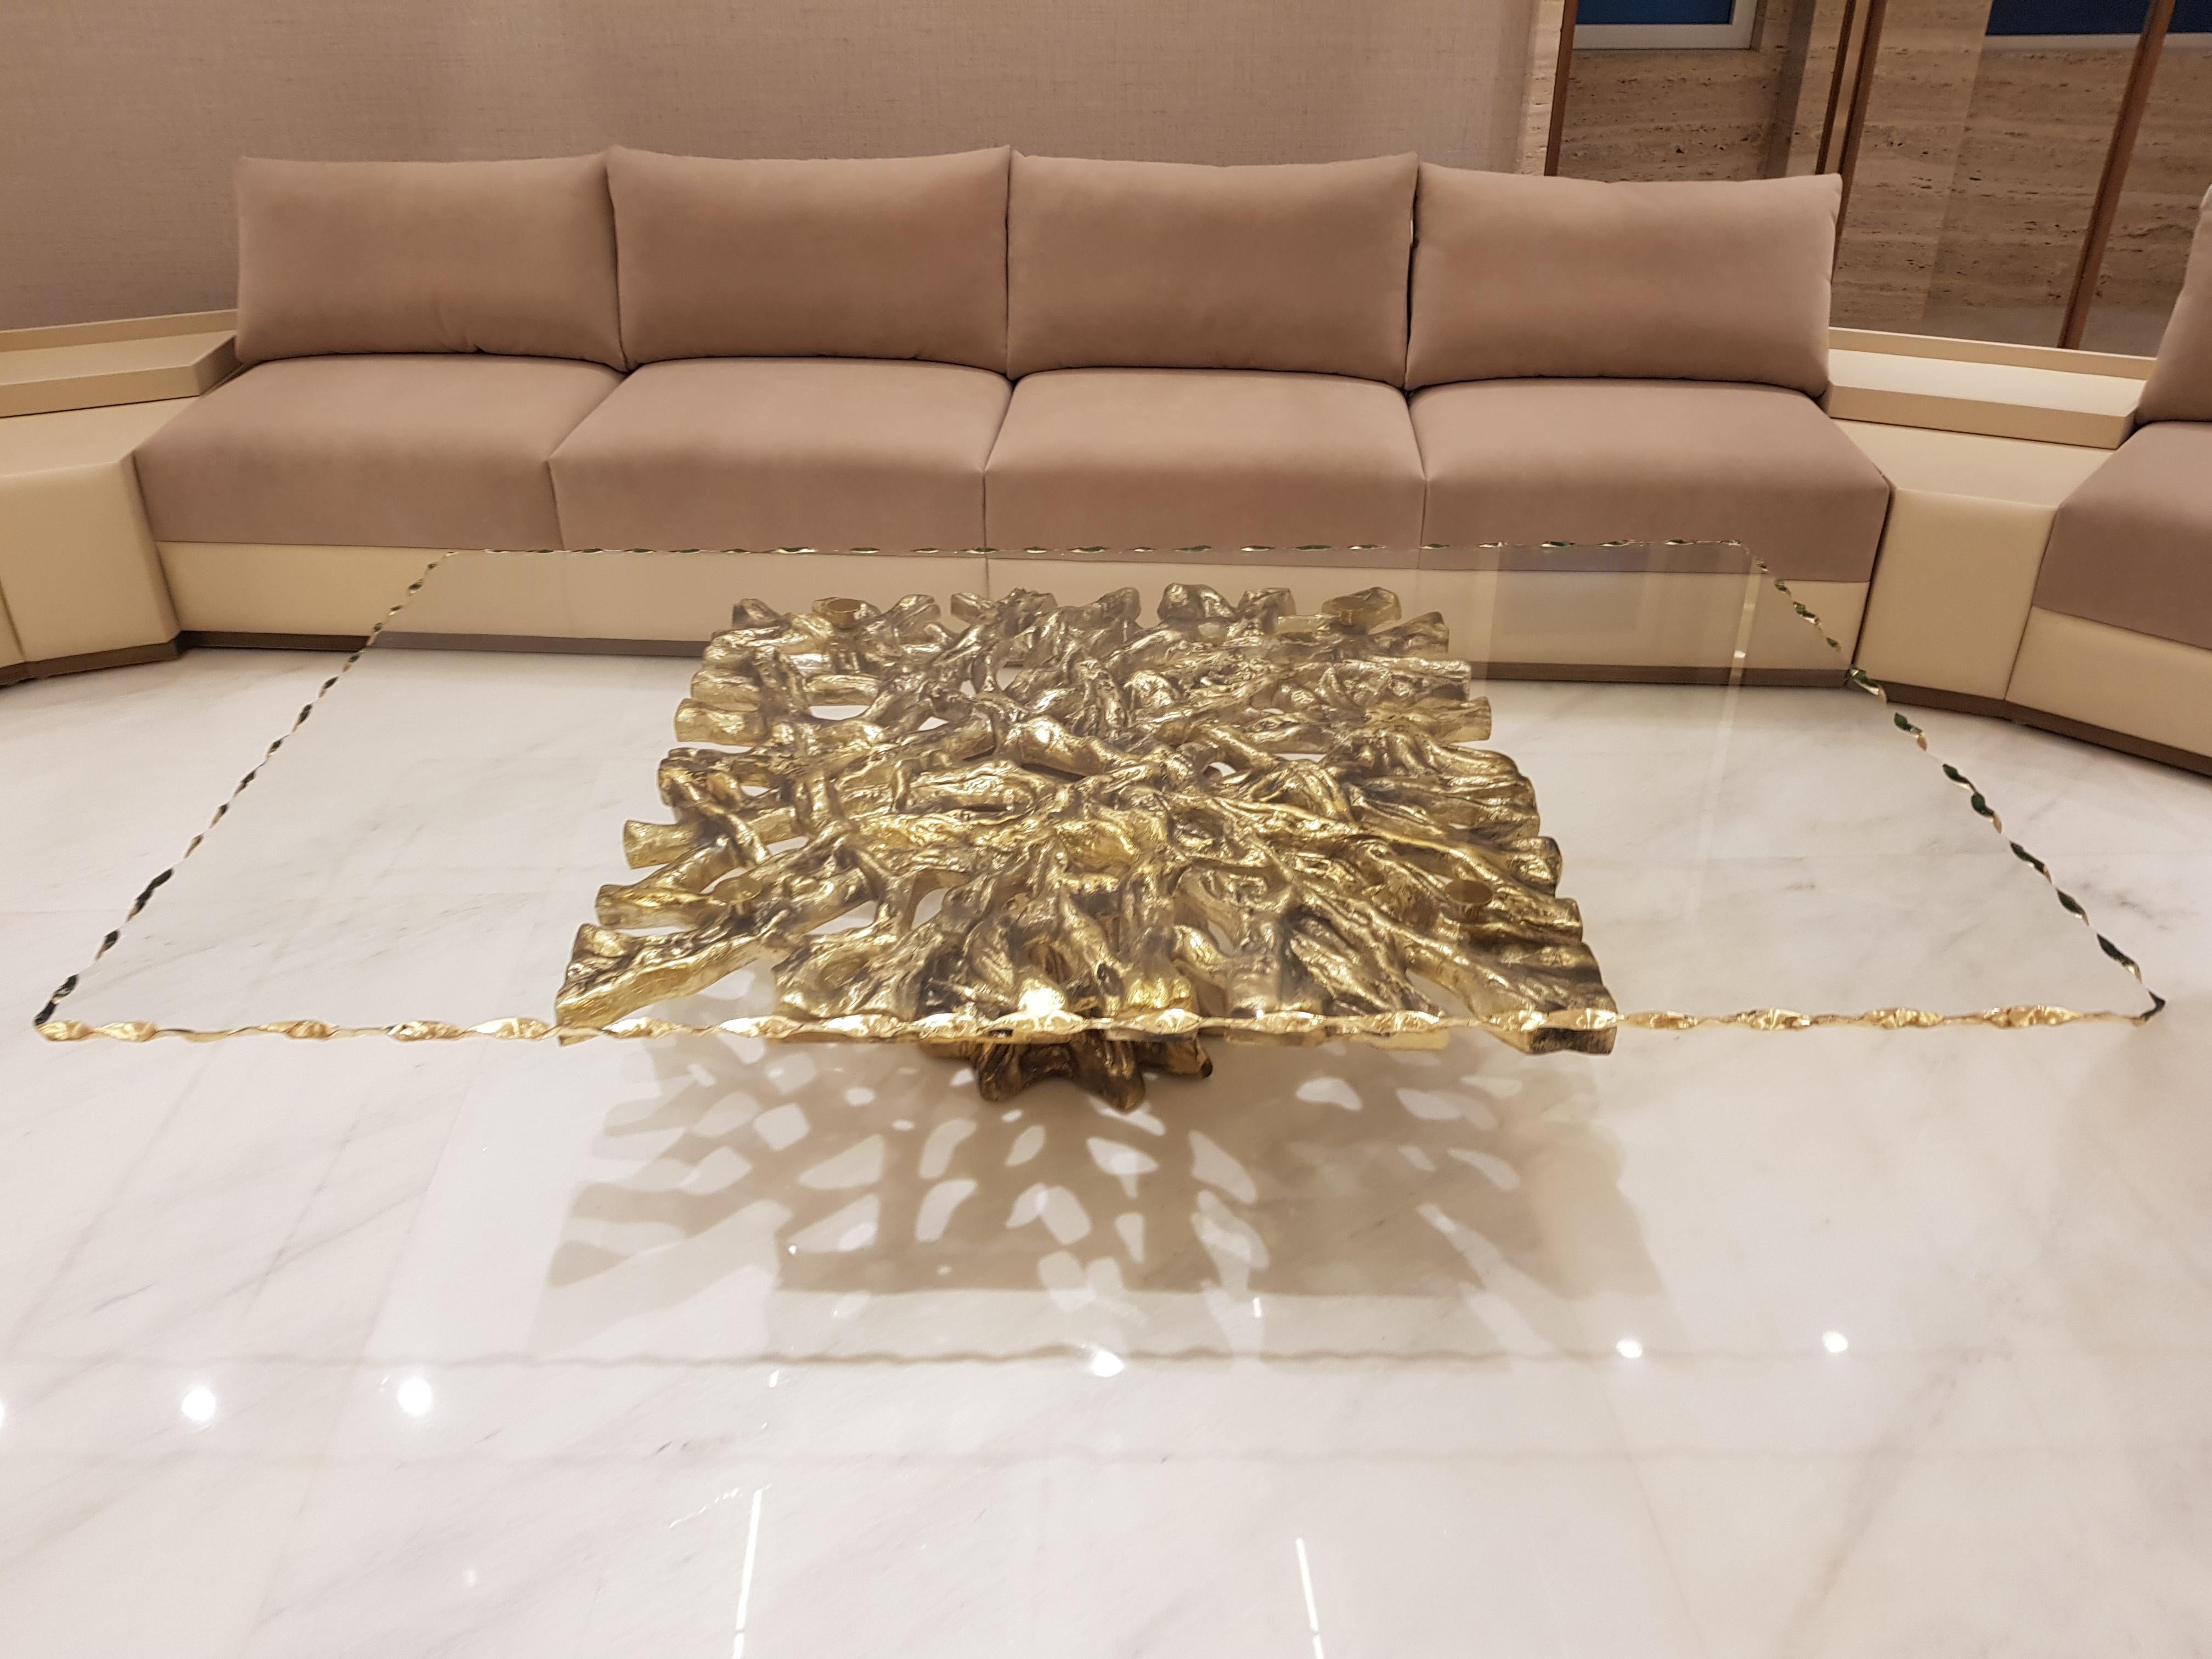 The Vivre table, crafted in brass and artisanal glass, draws its inspiration from the captivating beauty of nature and the symbolic Tree of Life. This remarkable piece of furniture seamlessly blends artistic aesthetics with functional design.
The